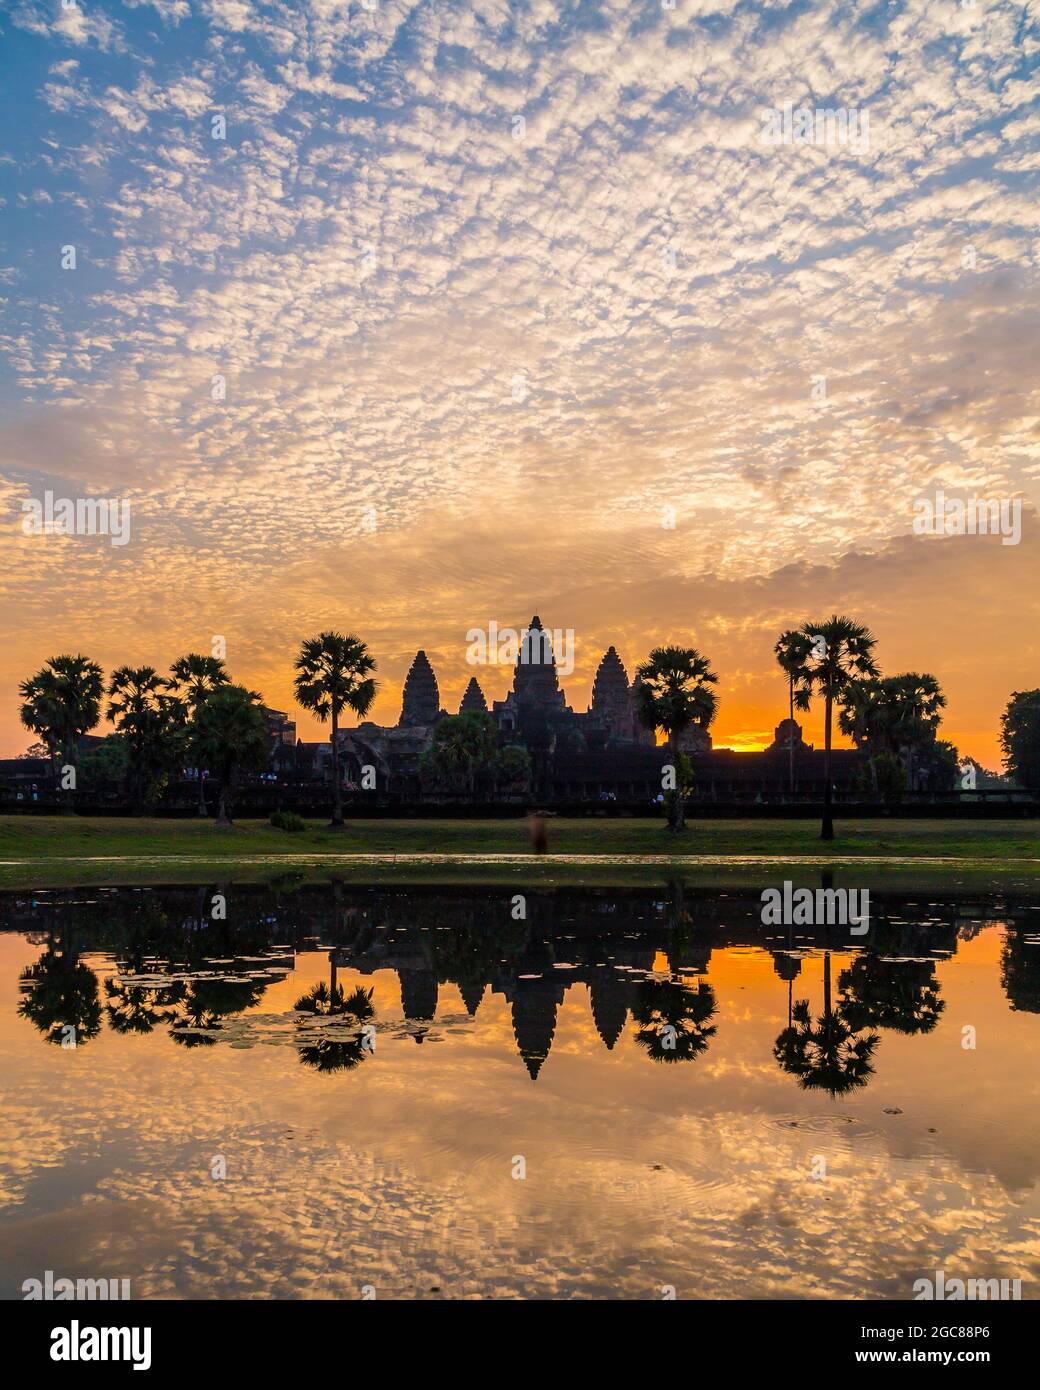 Sunrise at the Angkor Wat temple complex in Cambodia showing beautiful colours and reflections Stock Photo